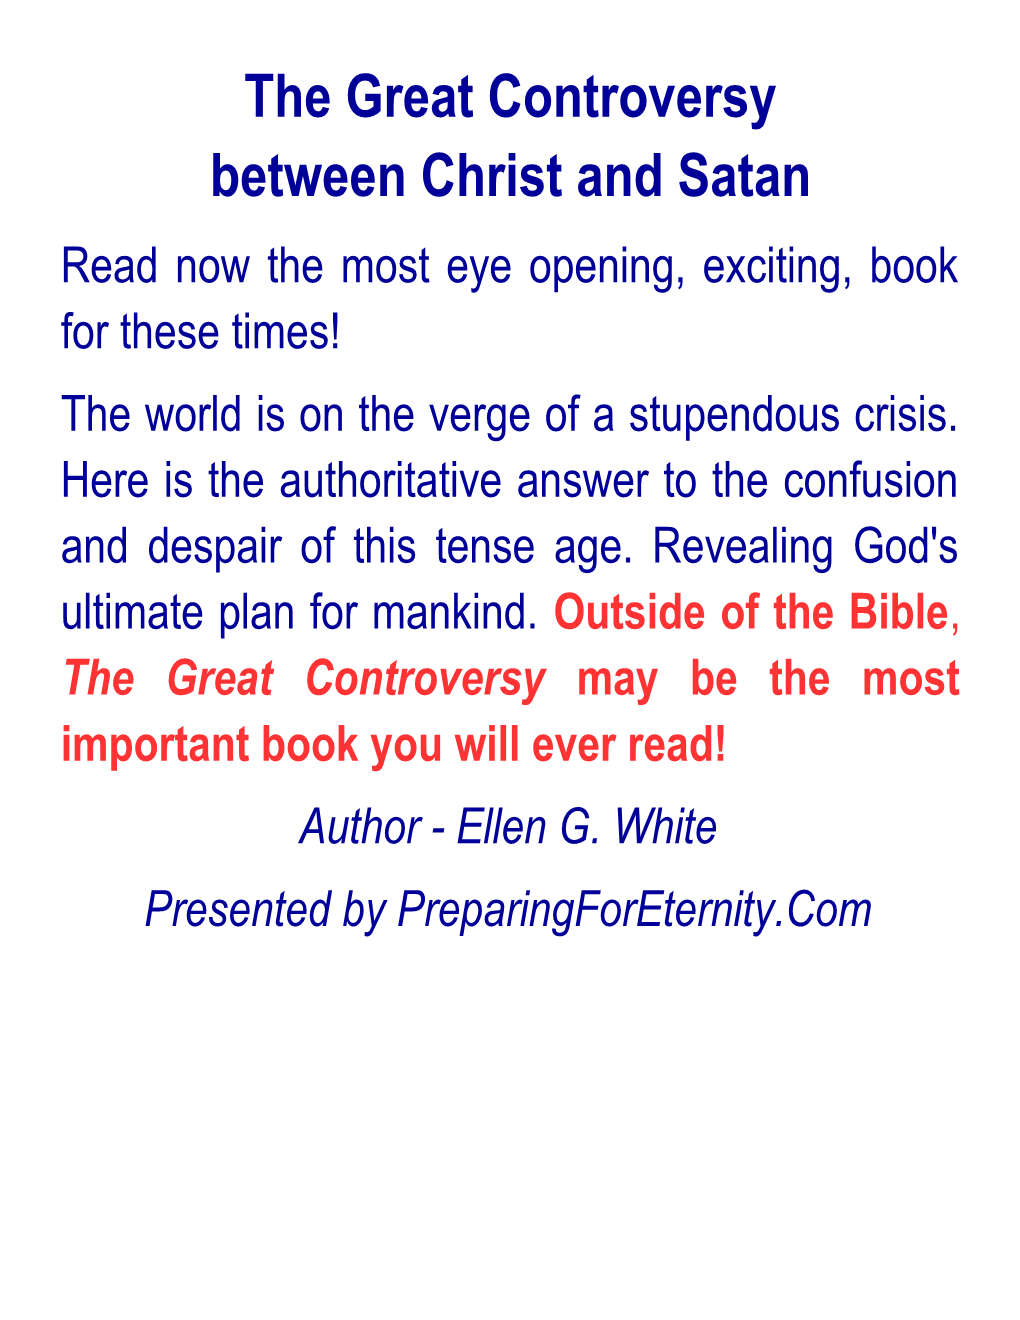 The Great Controversy Between Christ and Satan Read Now the Most Eye Opening, Exciting, Book for These Times! the World Is on the Verge of a Stupendous Crisis